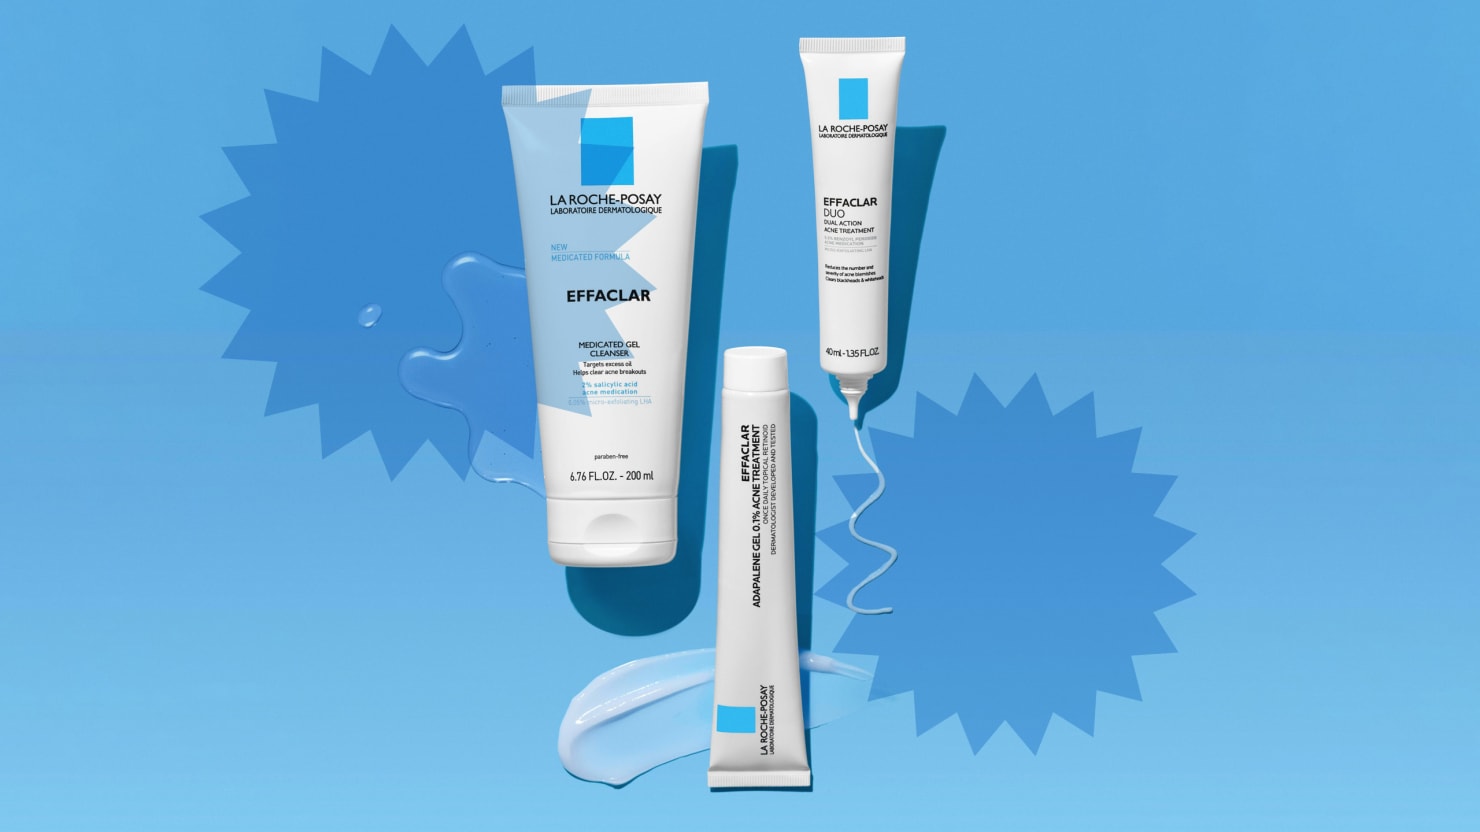 La Roche-Posay Effaclar Acne Products Review